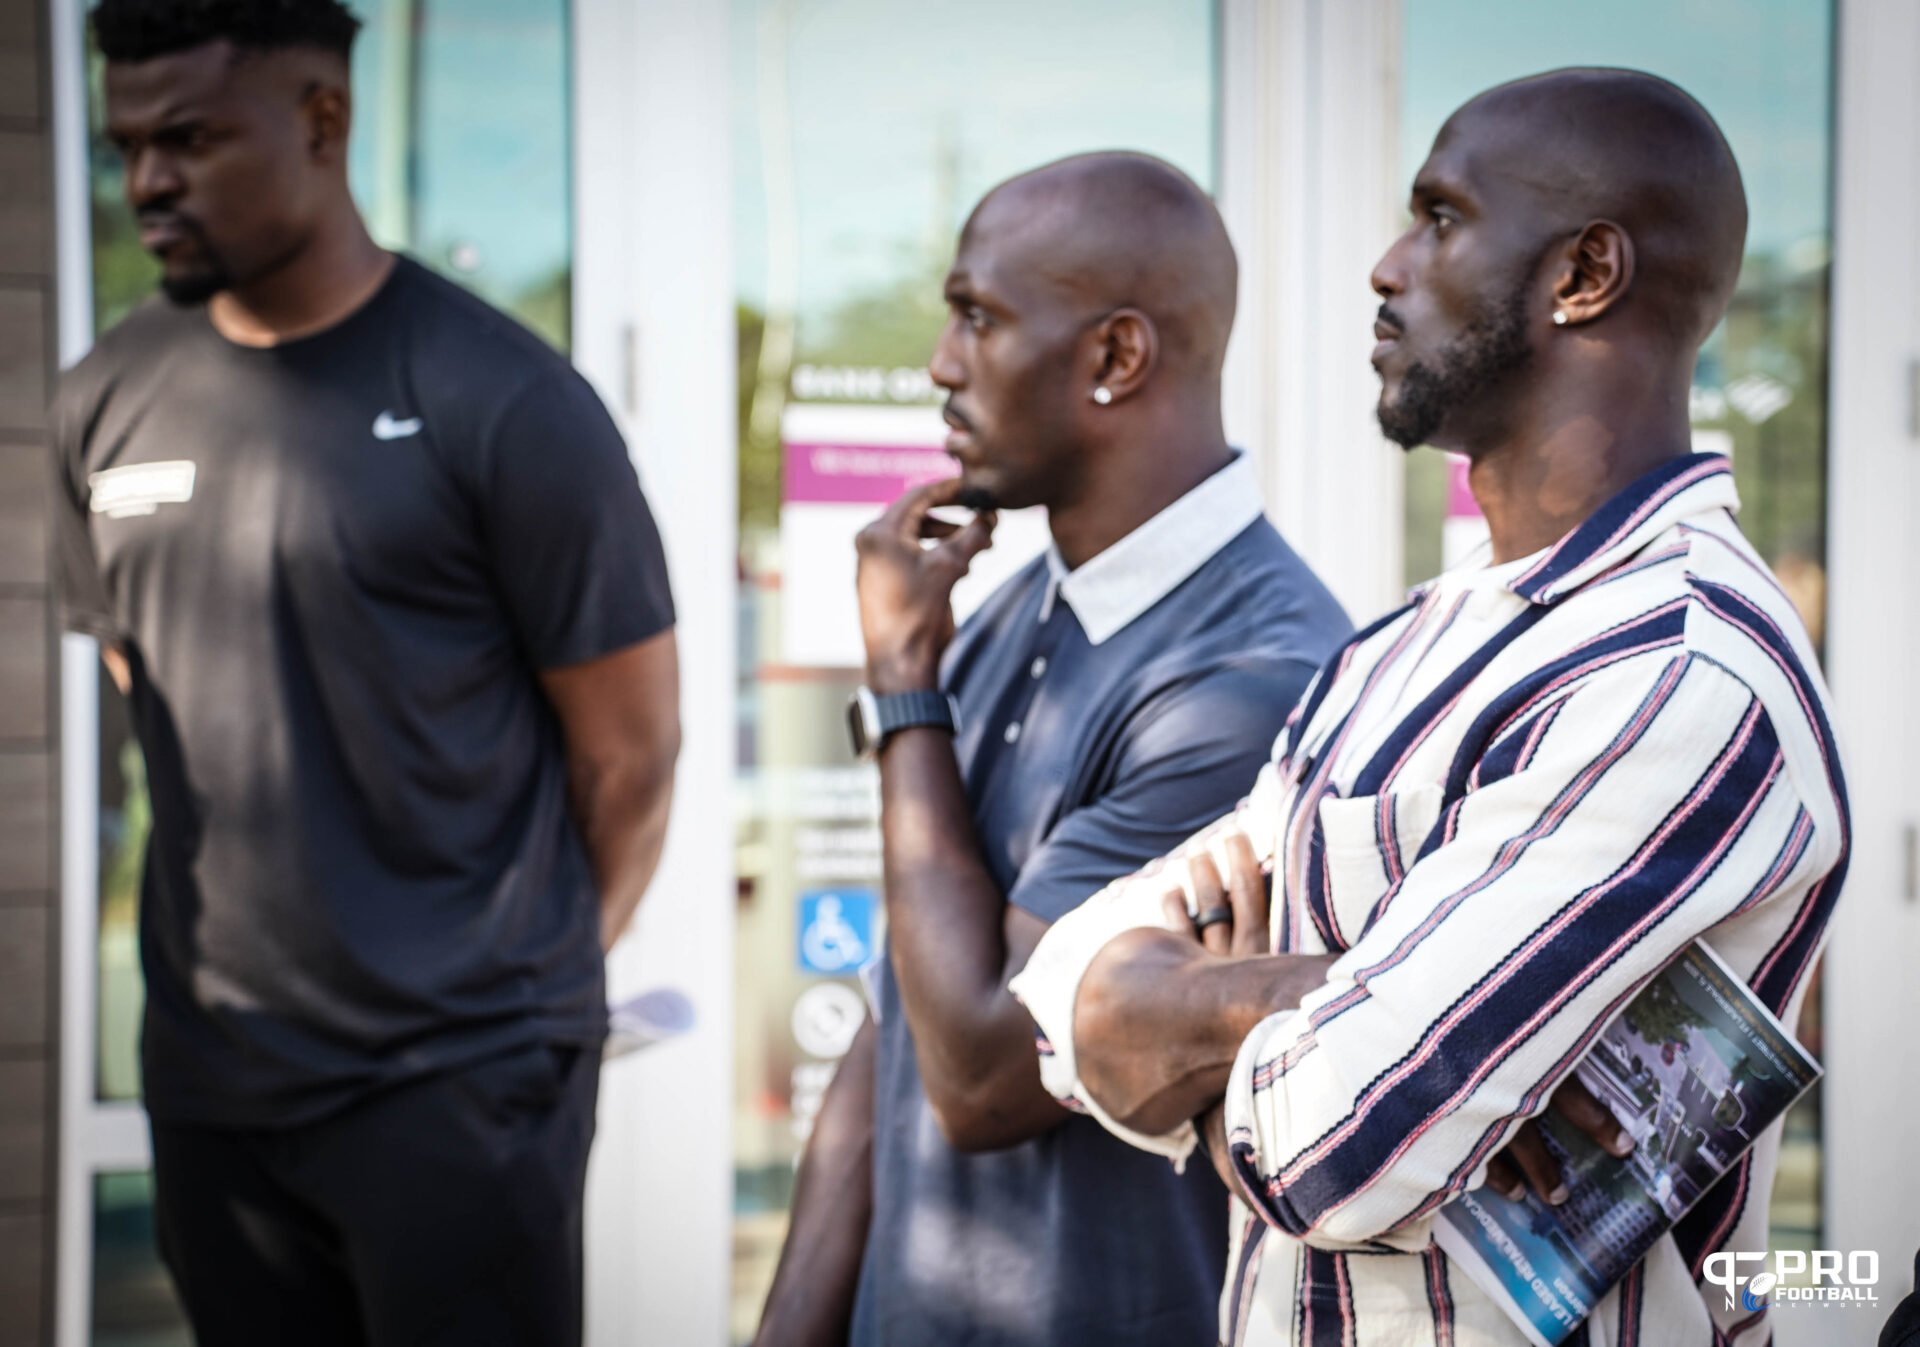 Devin and Jason McCourty: Famous Twins Even Bigger After NFL Retirement